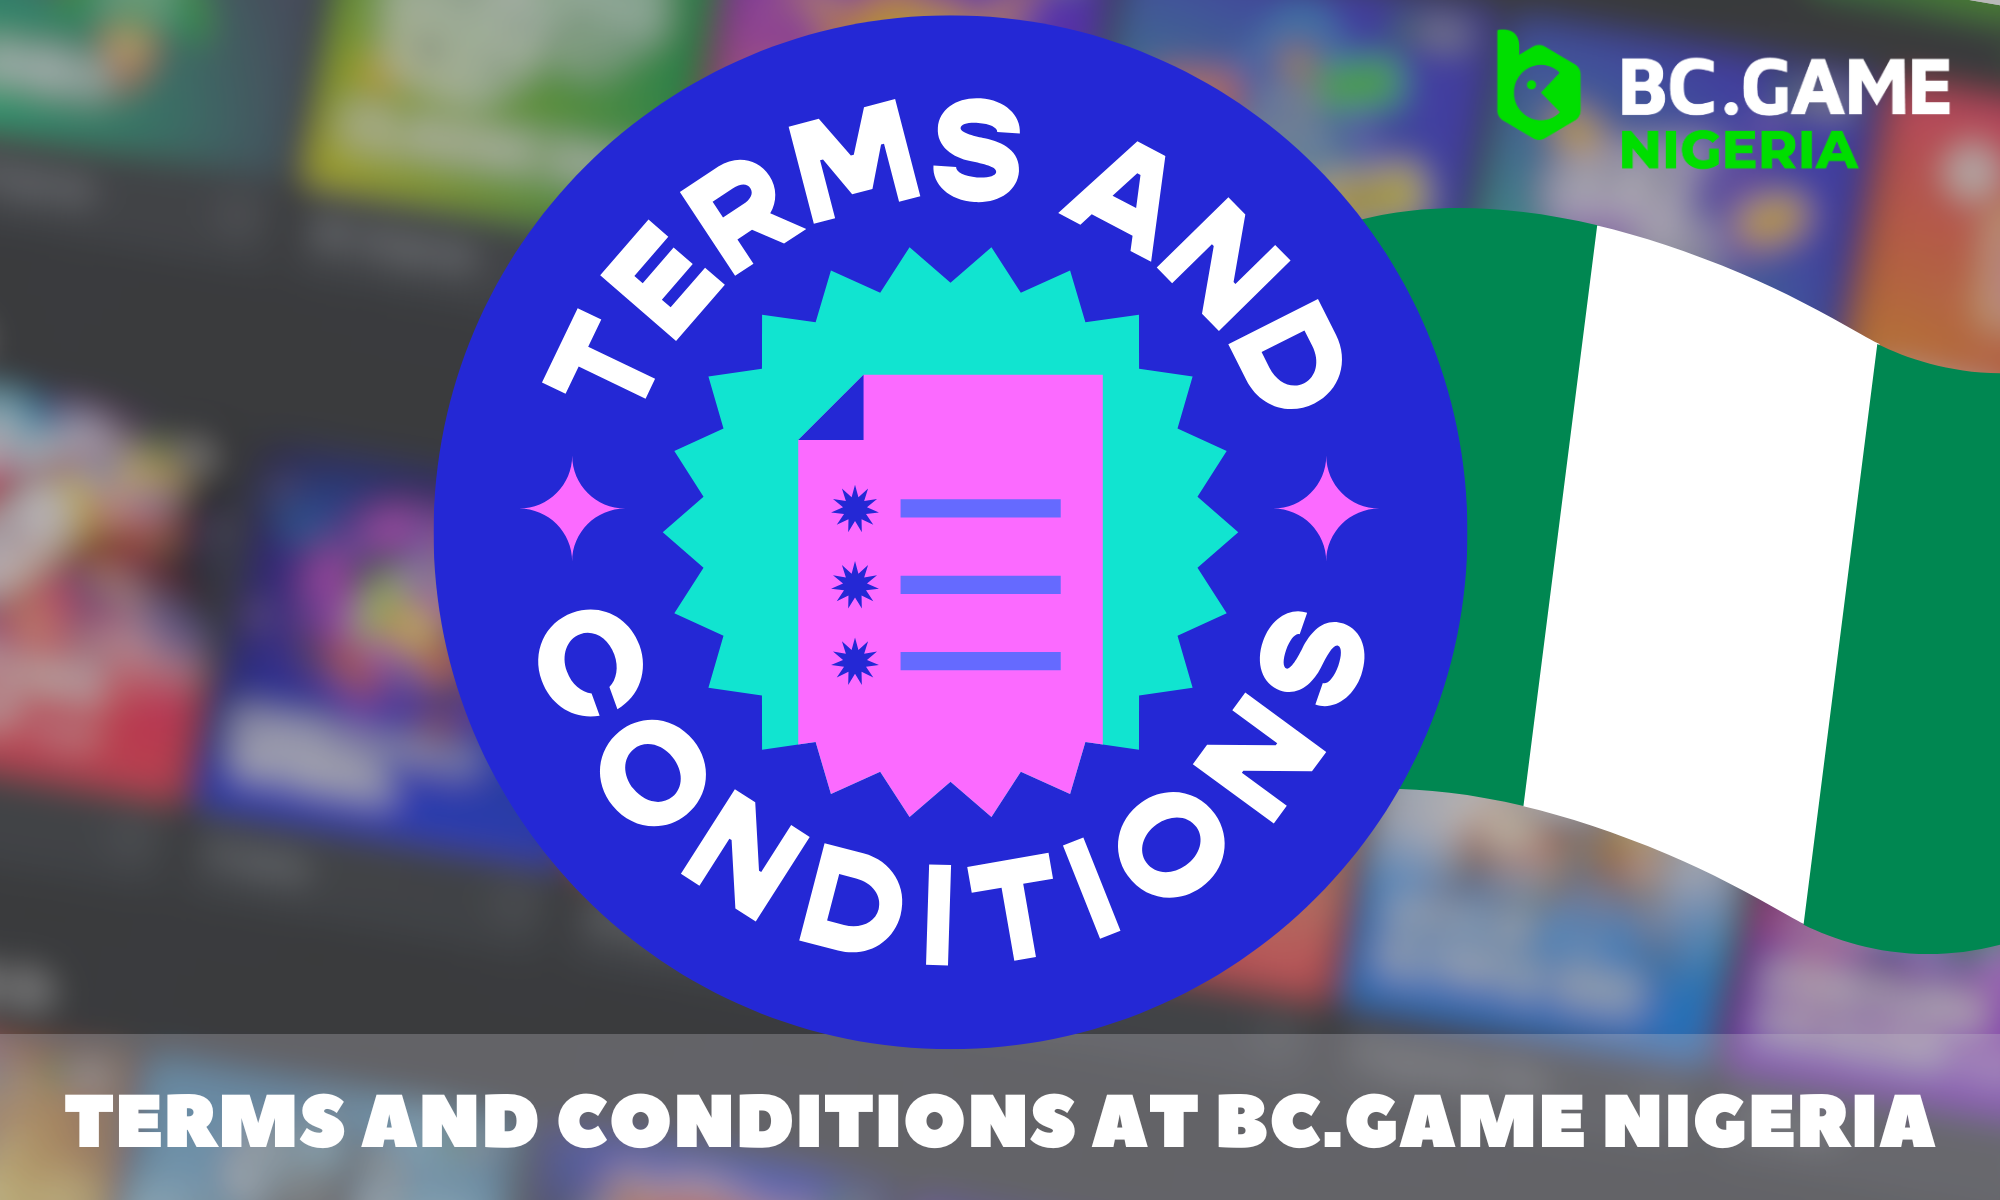 Before starting the game, all players should read the terms and conditions of BC.GAME Nigeria casino